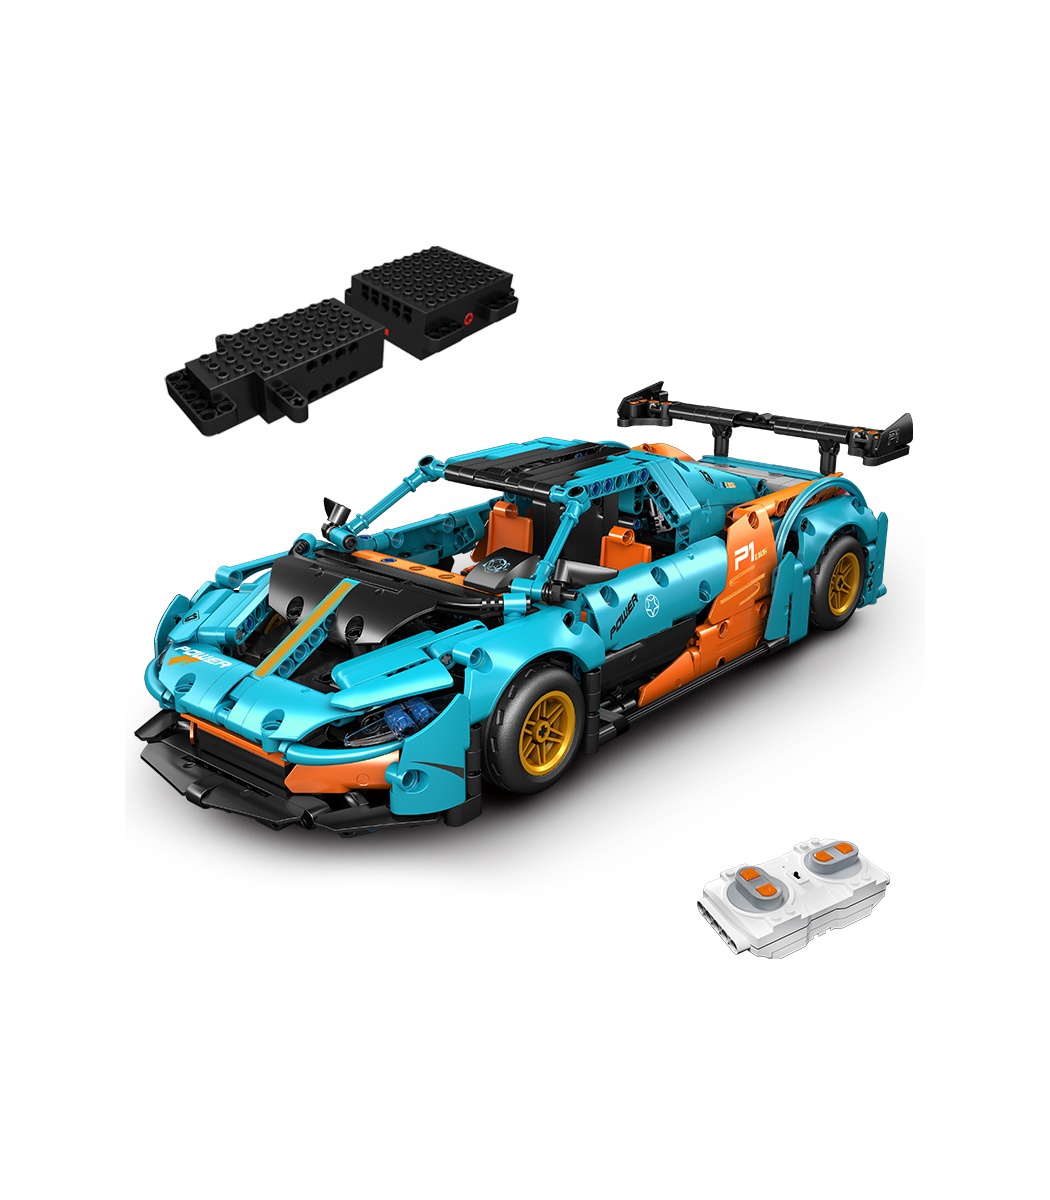  Motor and Remote Control Set for Lego Technic Porsche 911 RSR  42096 Set, 3 Motors, Set Compatible with Lego 42096 (Model Not Included) :  Toys & Games